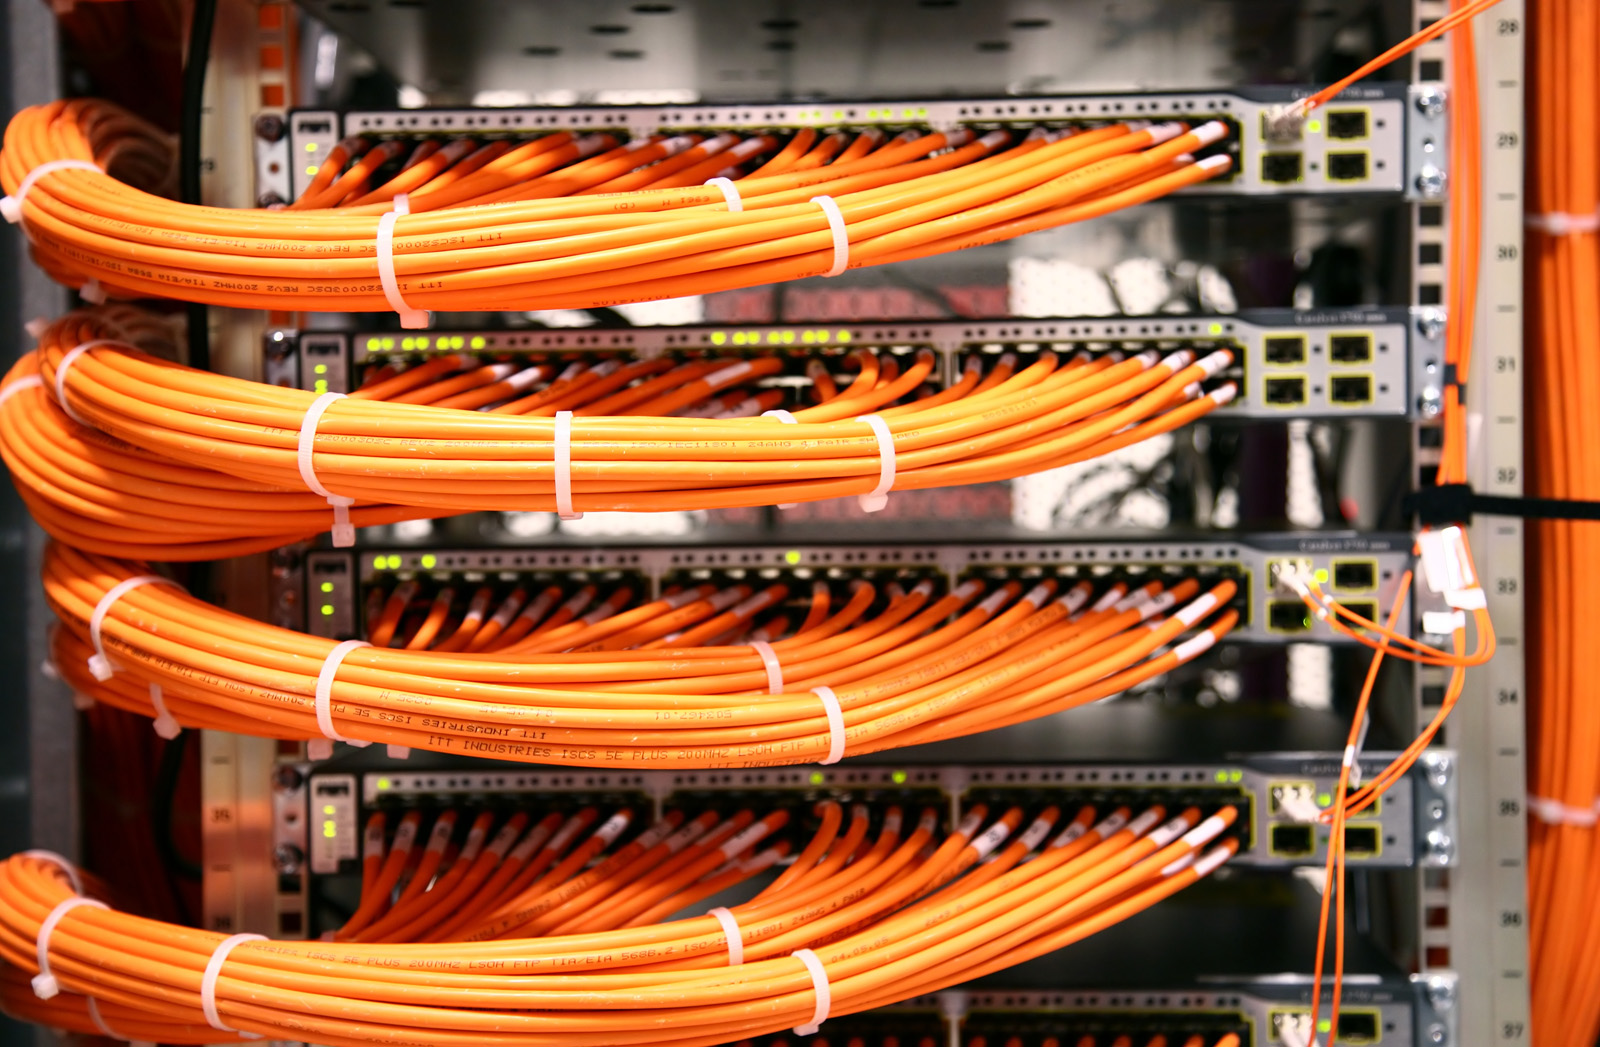 Paintsville KYs Top Quality Voice & Data Networking Cabling Services